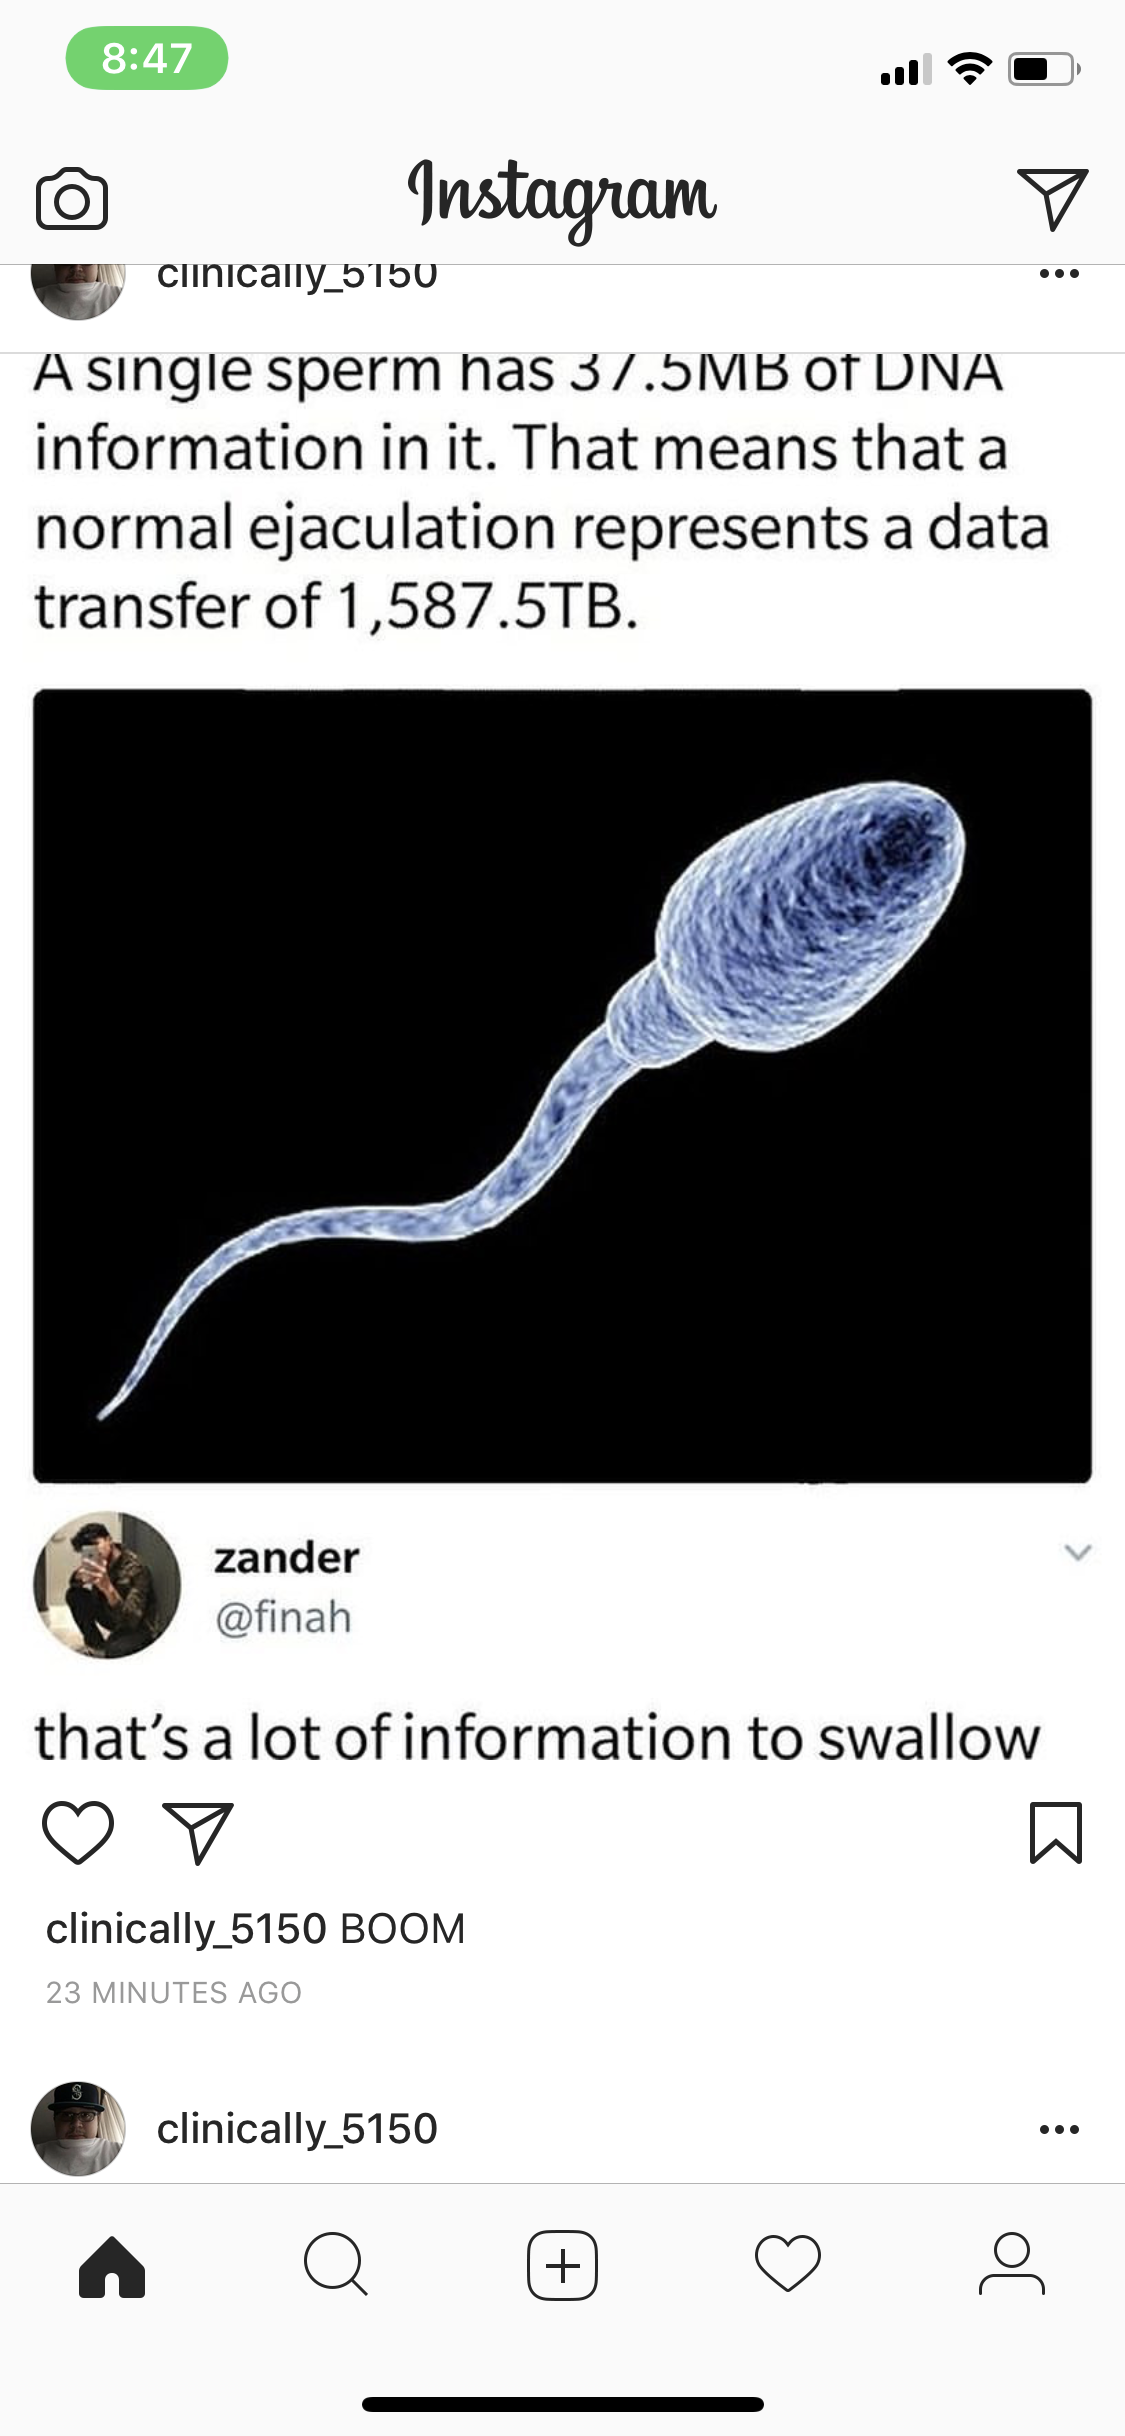 sperm data swallow - Instagram clinically_3150 A single sperm has 37.5MB Ot Dna information in it. That means that a normal ejaculation represents a data transfer of 1,587.5TB. zander finah that's a lot of information to swallow Y clinically 5150 Boom 29 